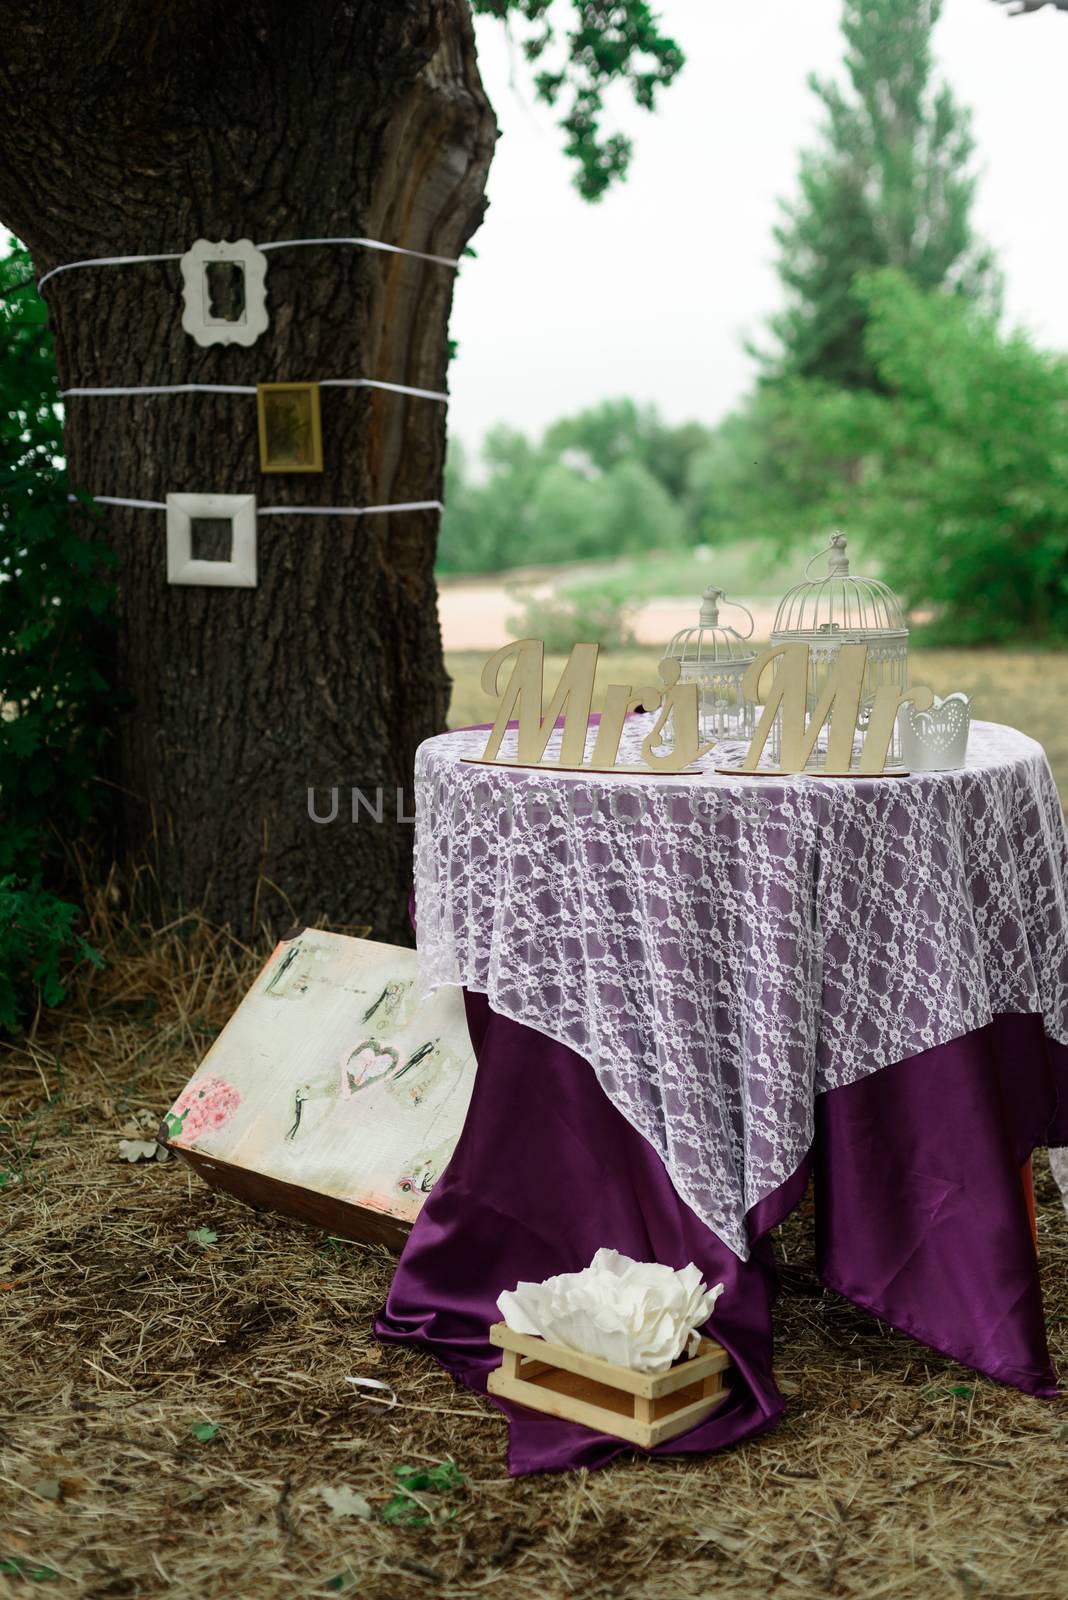 decorative photo zone with a suitcase and a table near the tree